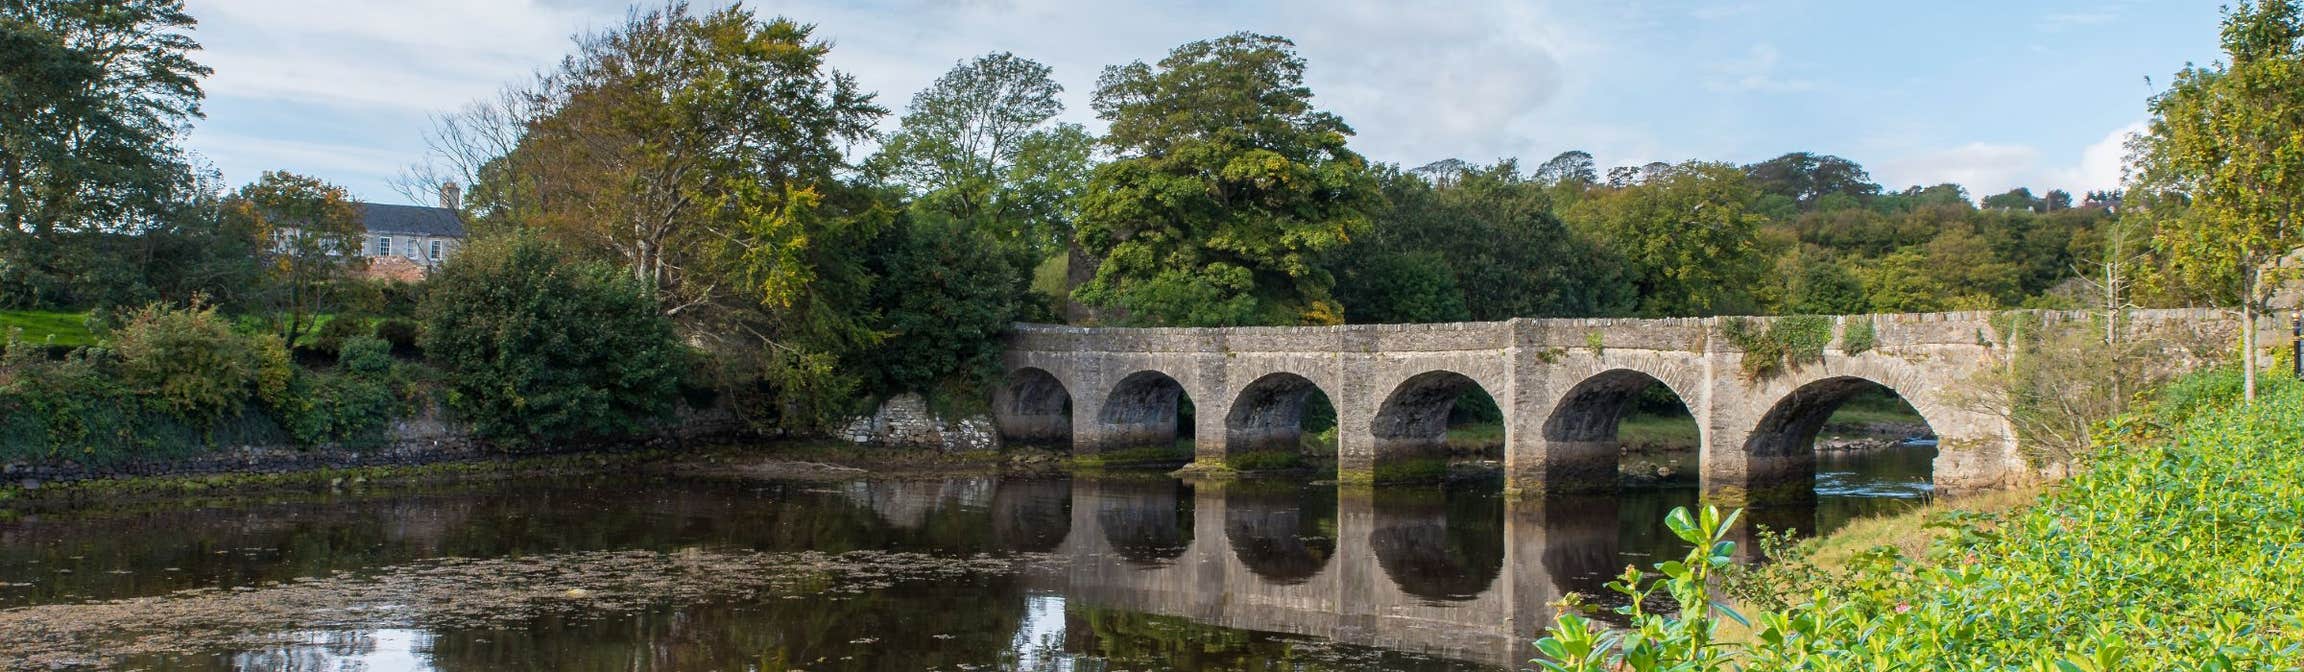 Image of a bridge in Buncrana in County Donegal